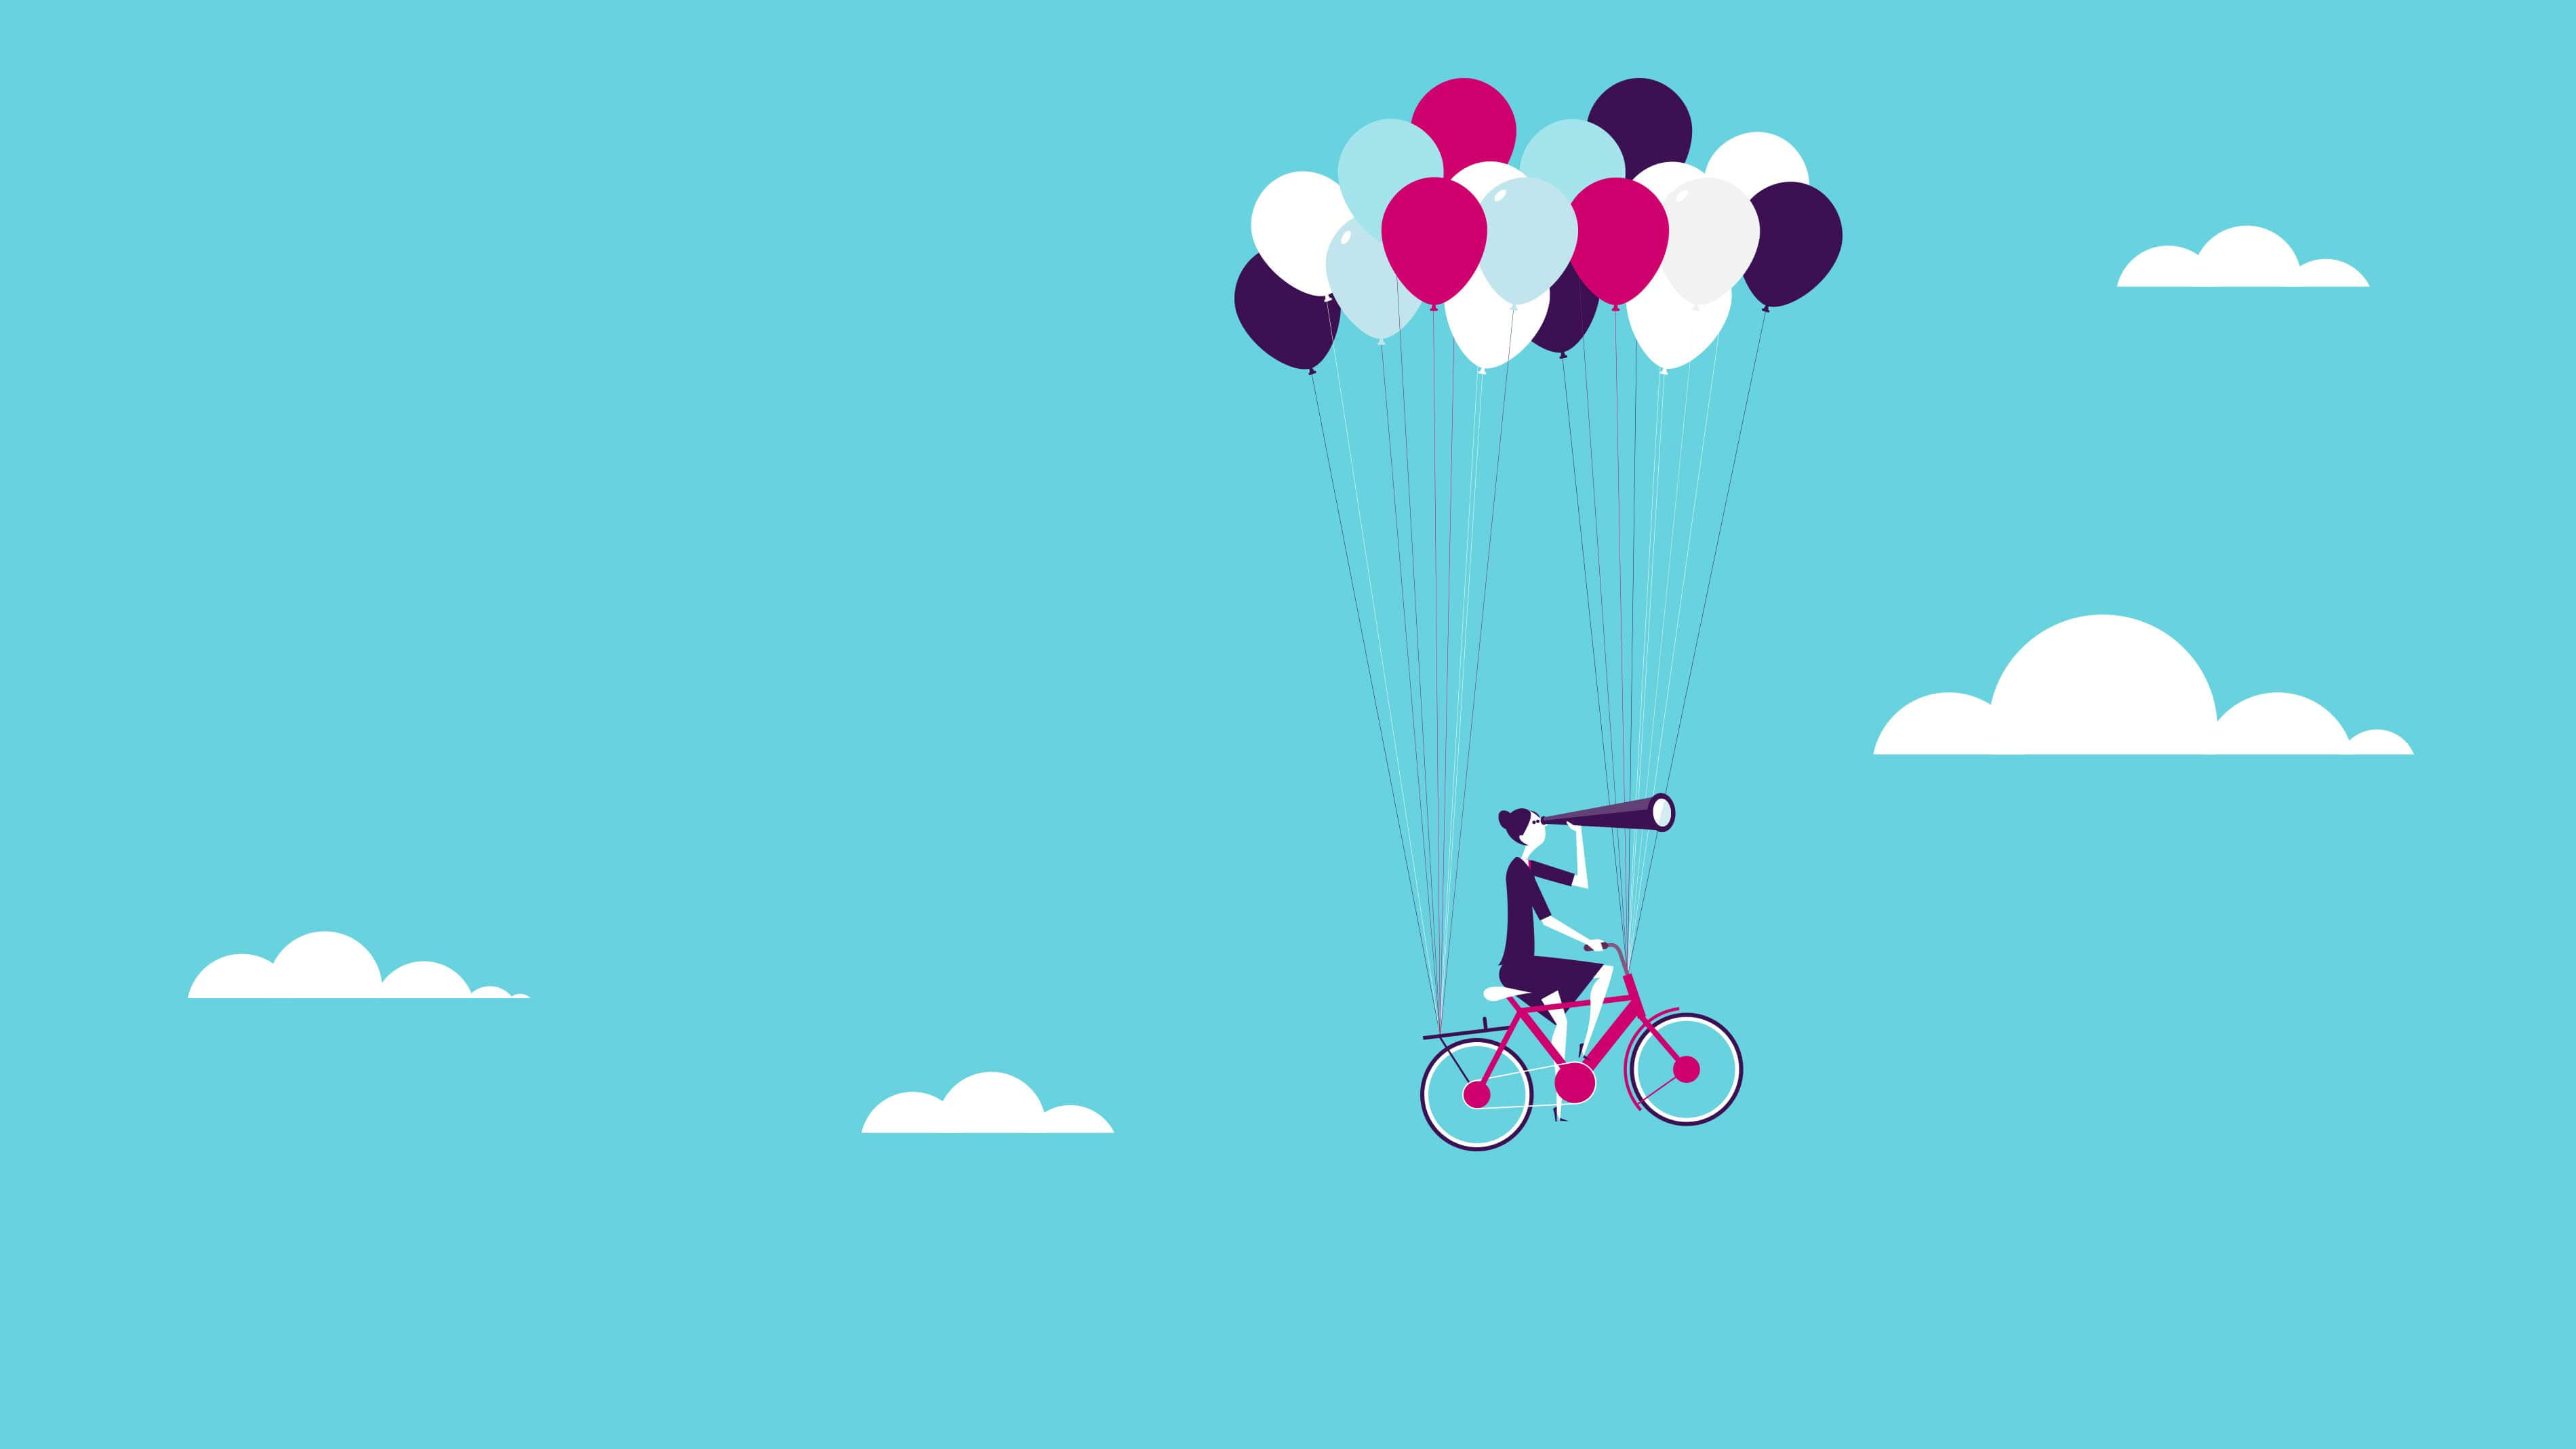 Employee engagement animation that gets teams thinking about cost reductions